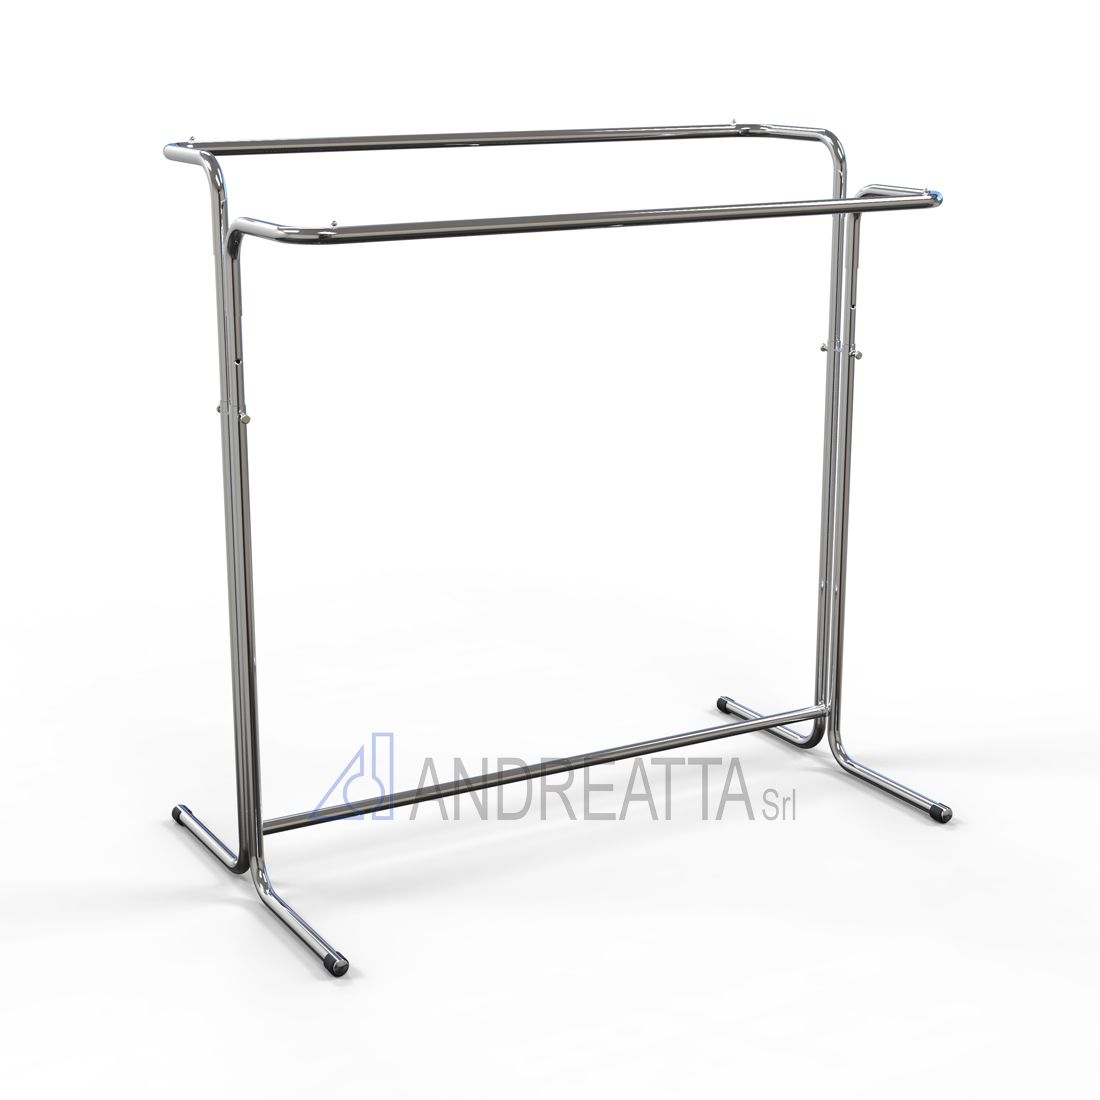 Double Garment rail Adjustable in height